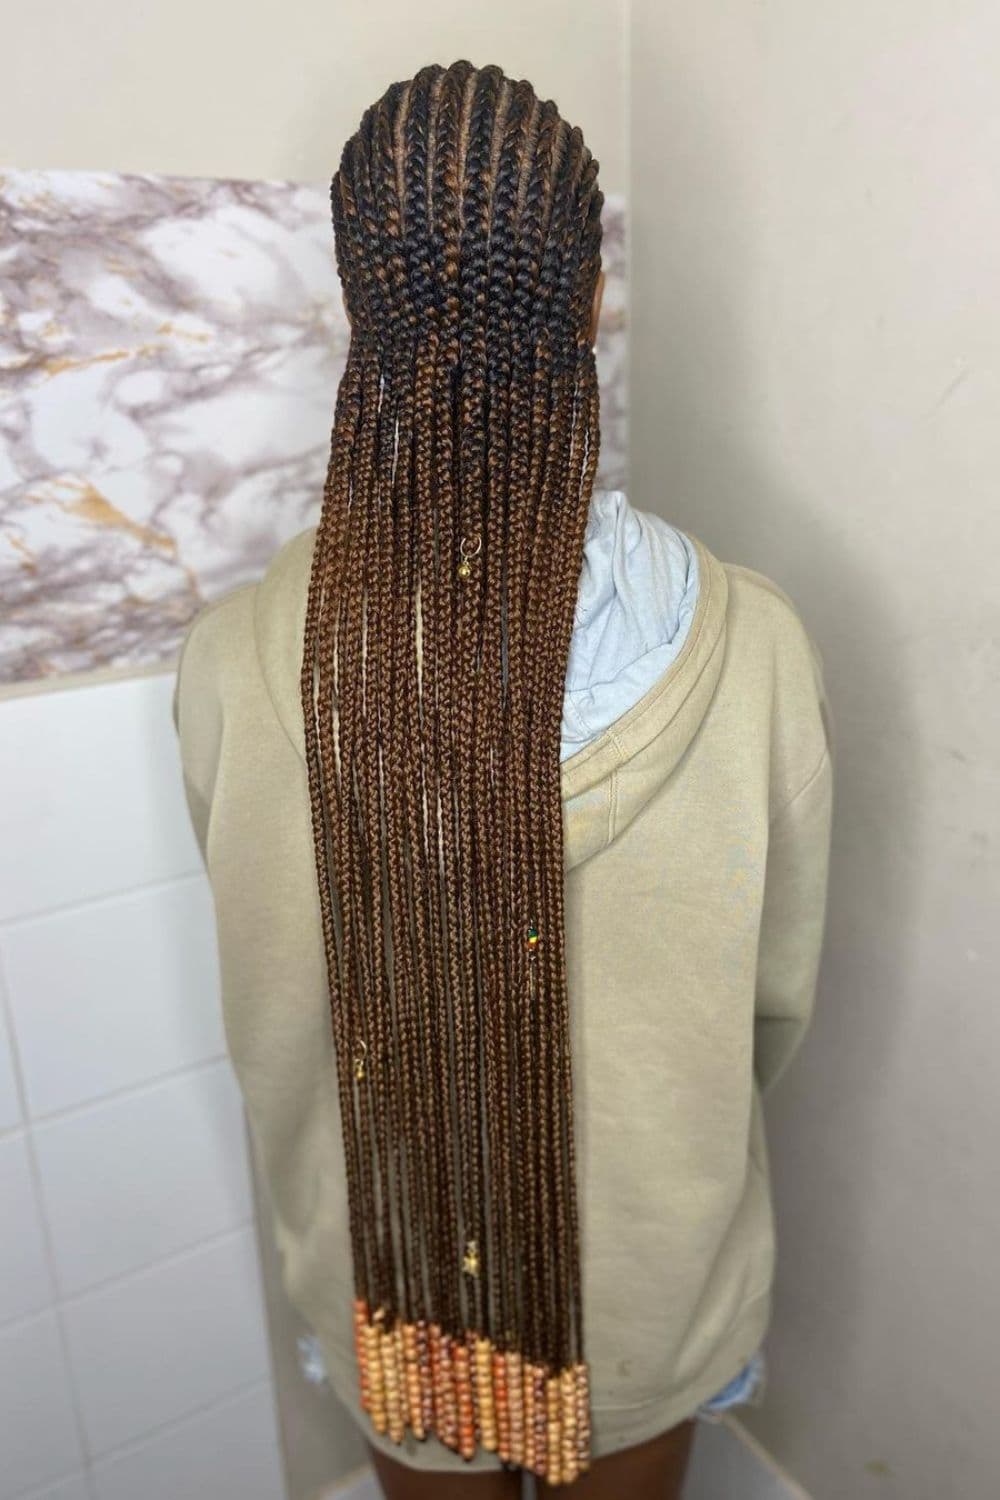 A woman wearing a sweater with brown long cornrows with beads.